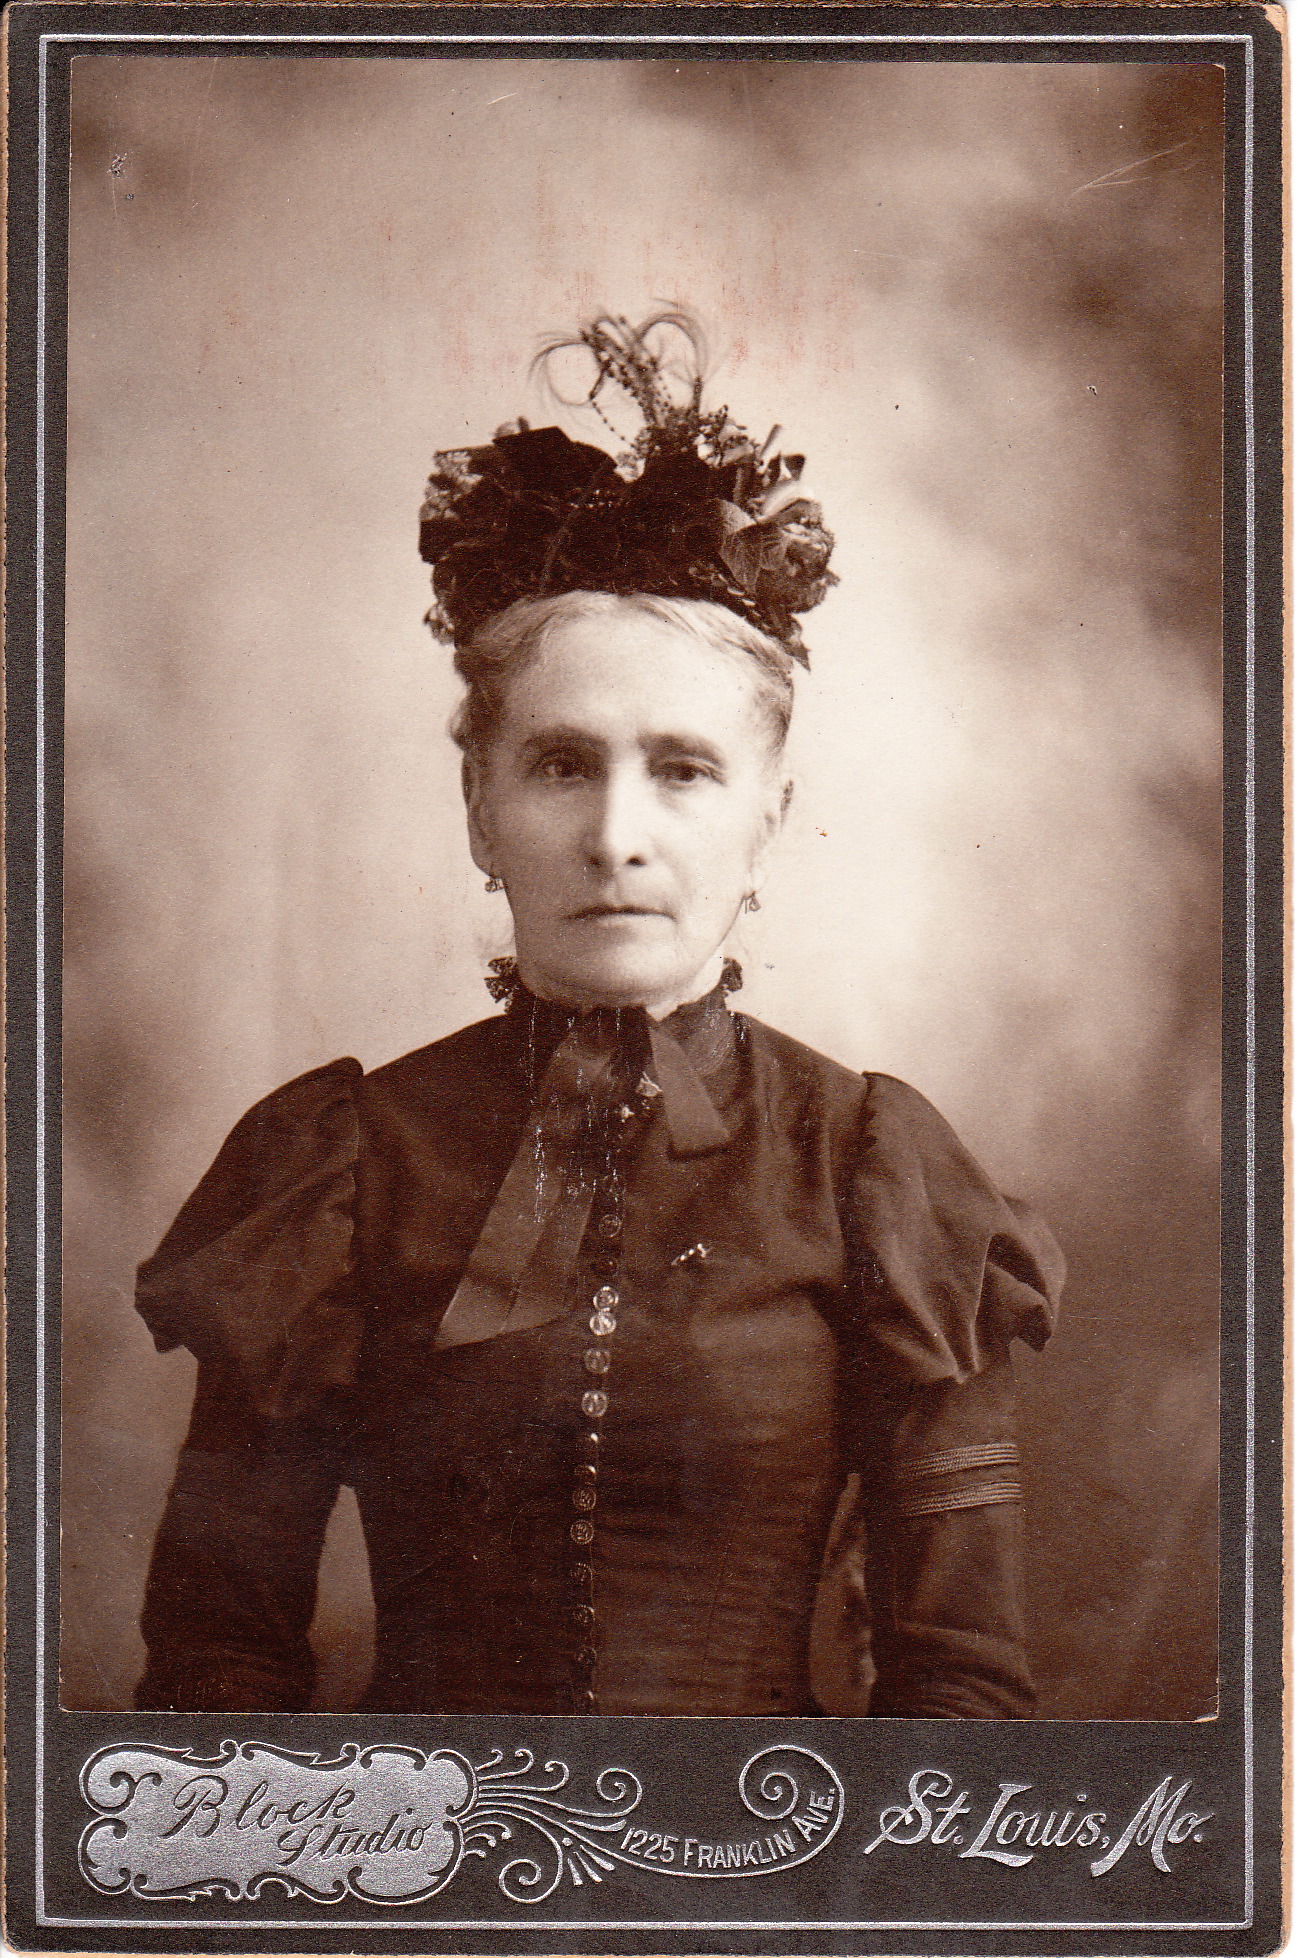 OLDER WOMAN MAKES FASHION STATEMENT IN ST. LOUIS, MISSOURI | THE CABINET CARD GALLERY